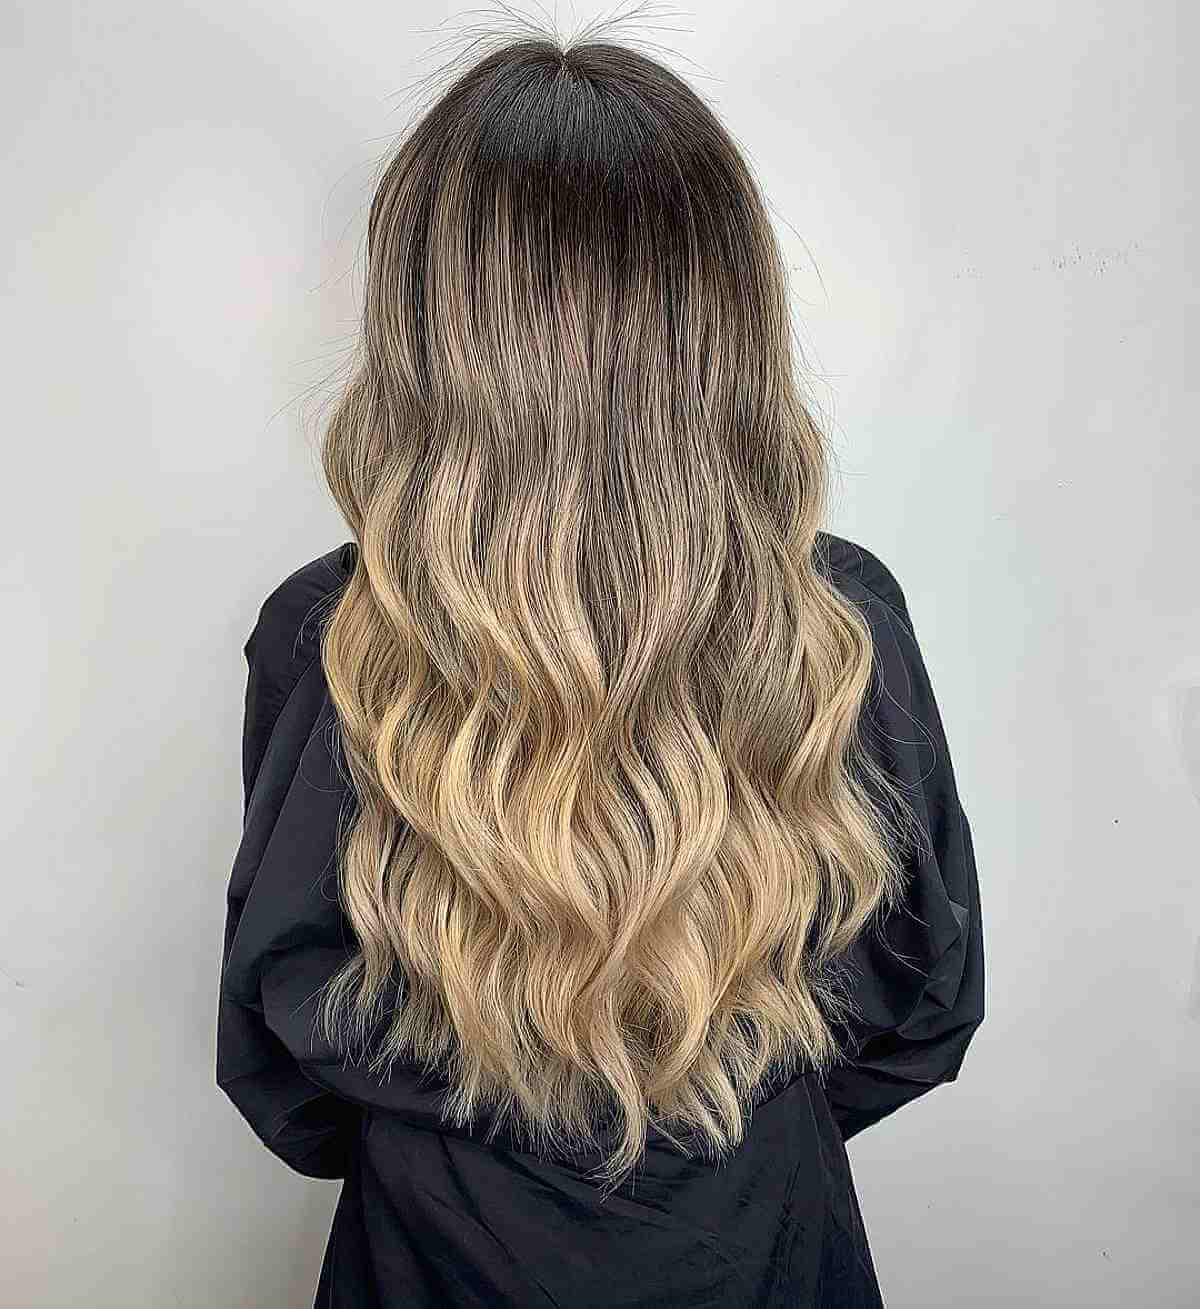 45 Long Ombre Hair Ideas Blowing Up in 2023